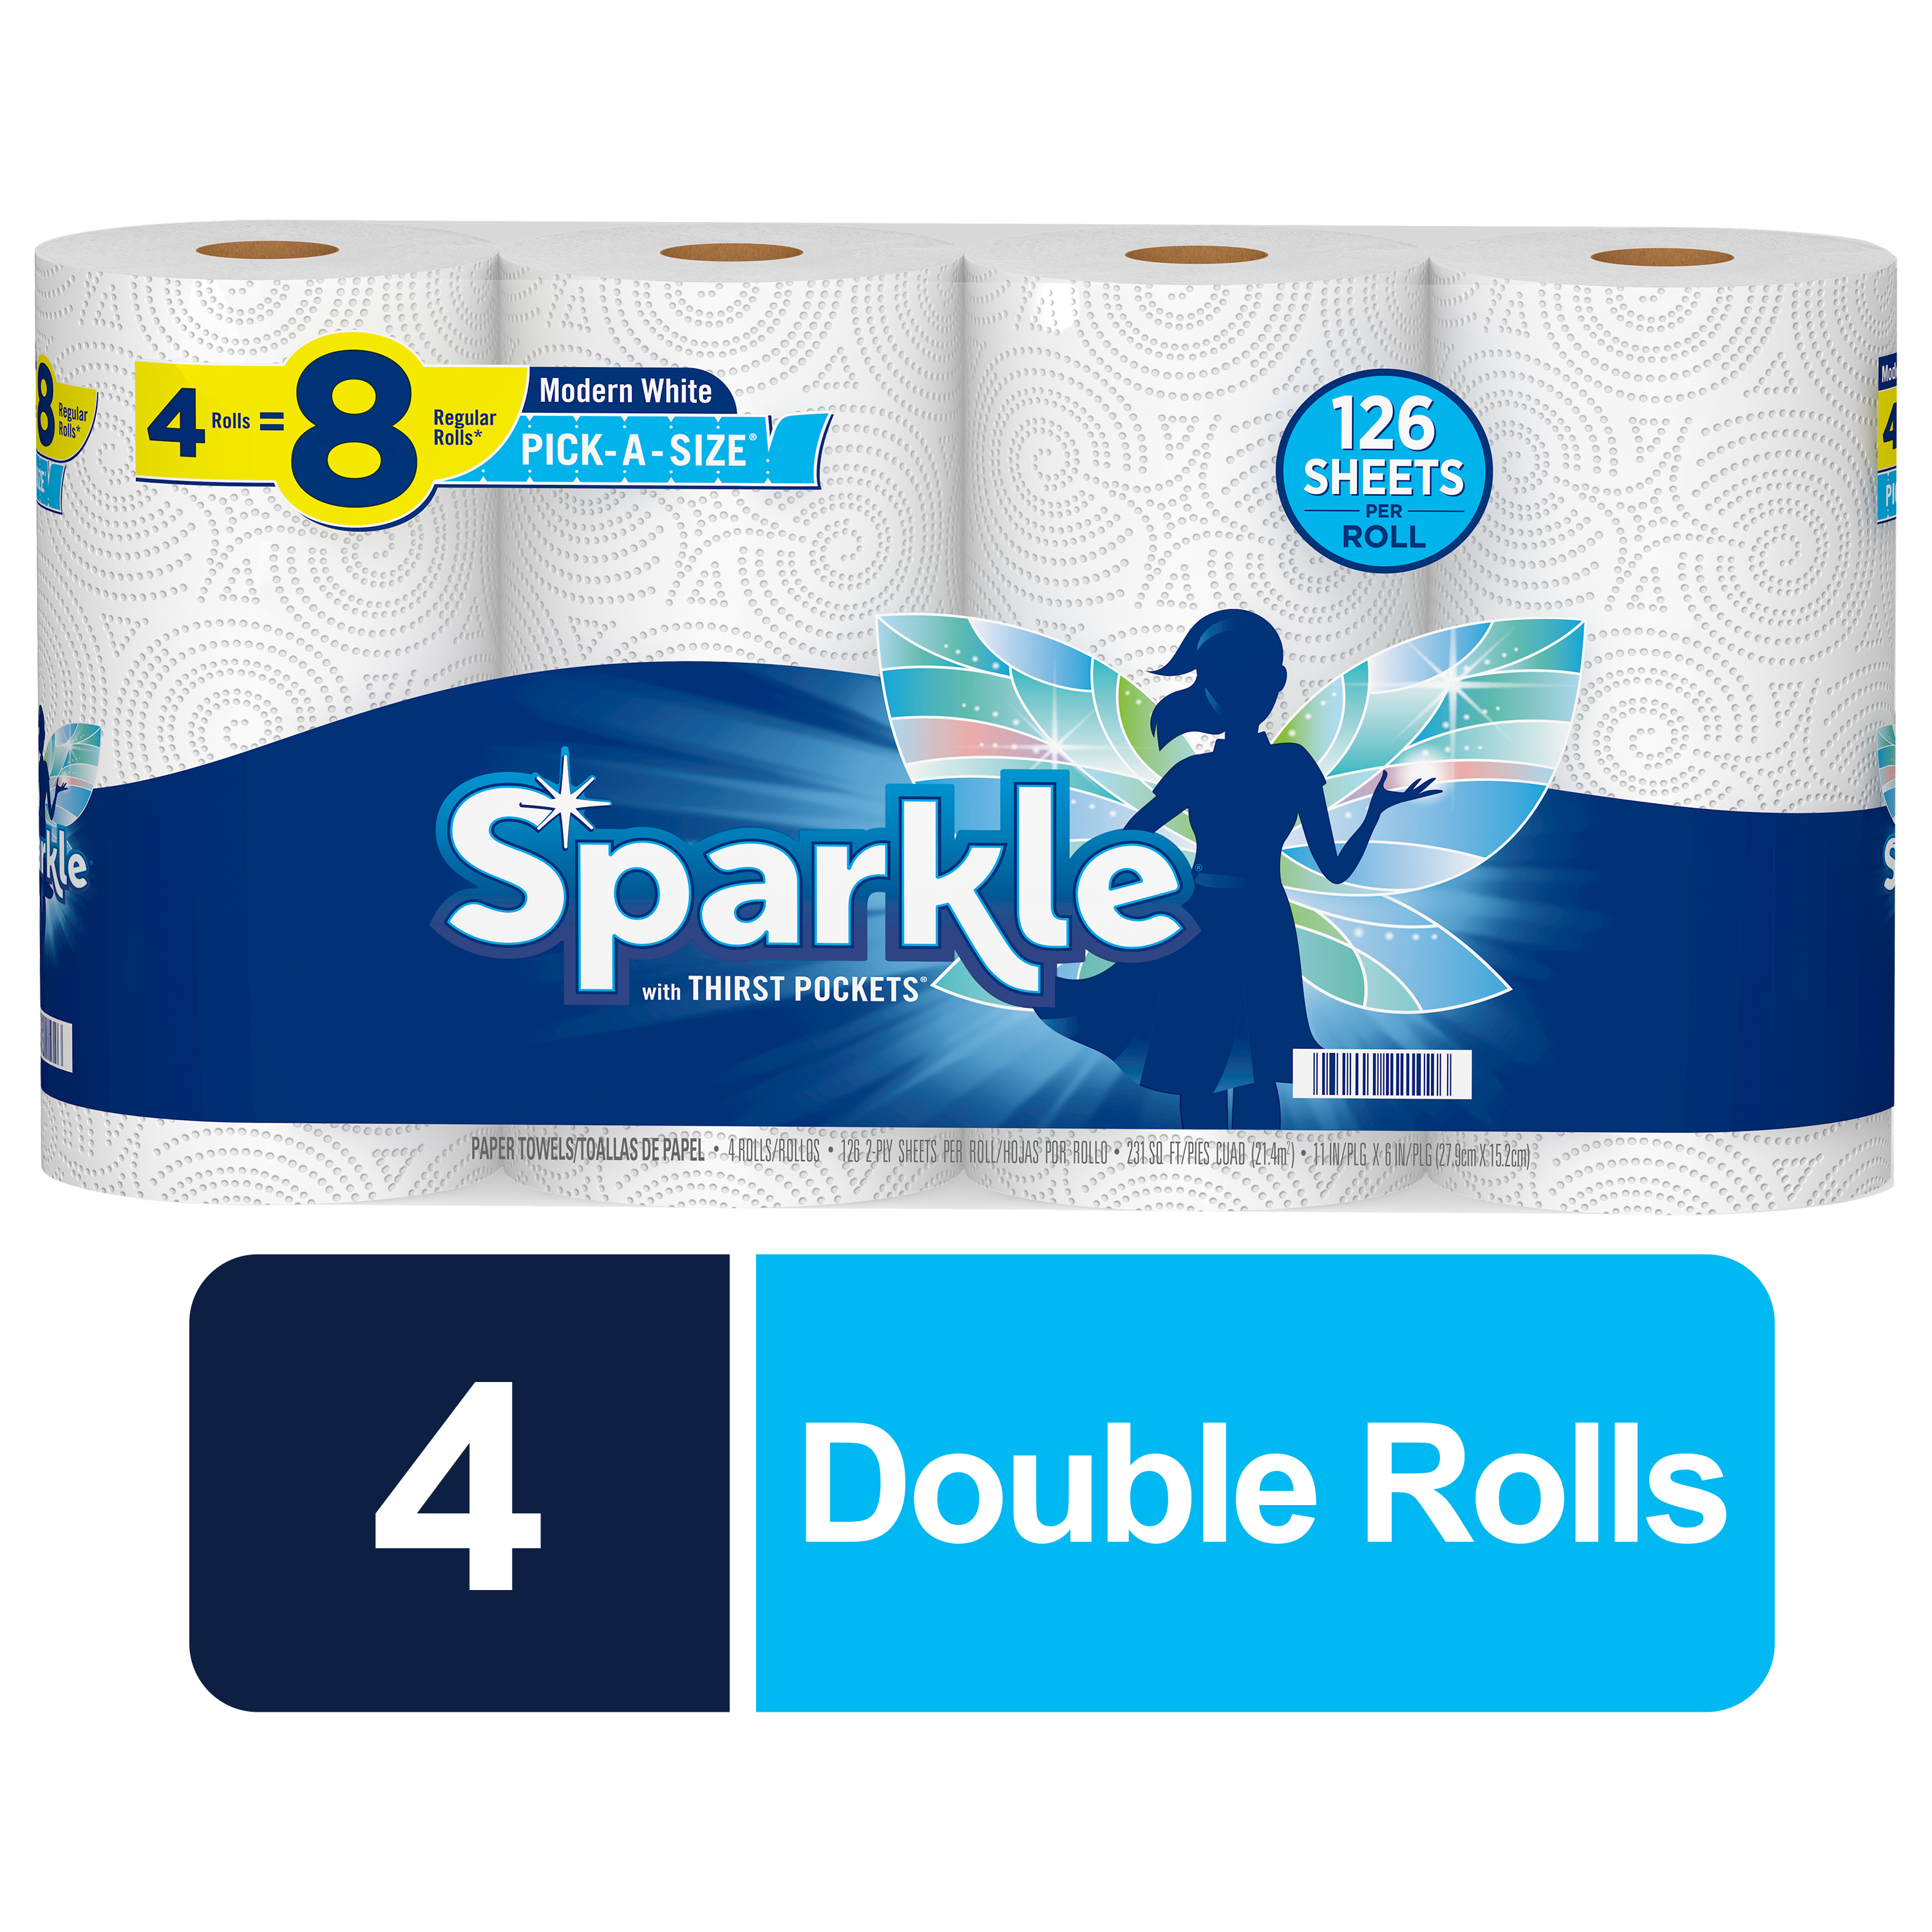 Sparkle Pick-A-Size Paper Towels, White, 4 Double Rolls = 8 Regular Rolls, 126 2-Ply Sheets Per Roll - image 1 of 17